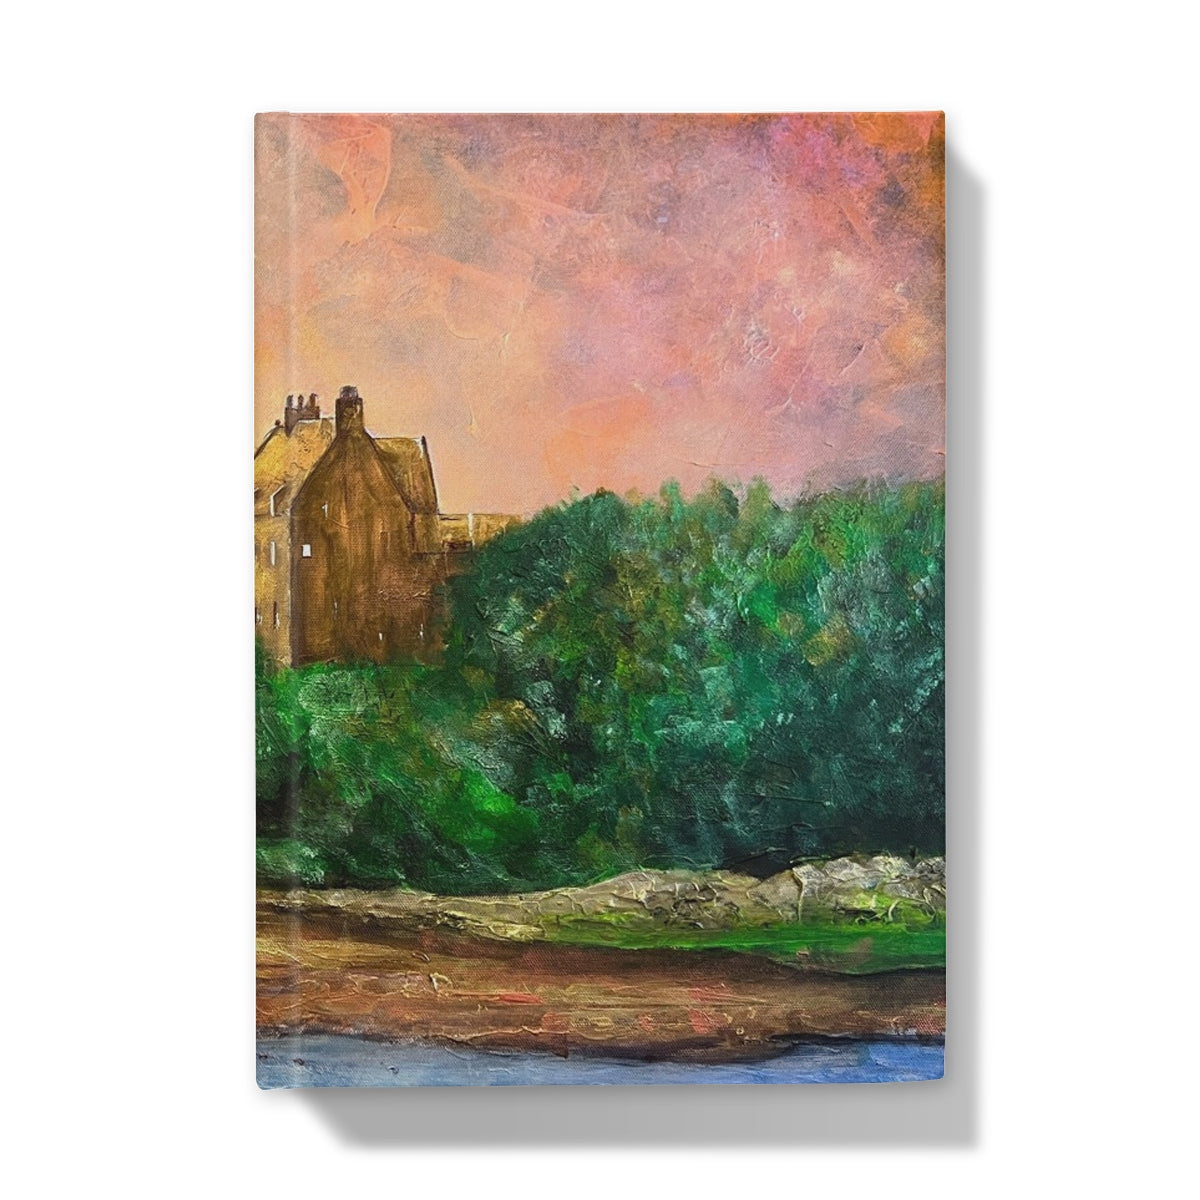 Duntrune Castle Art Gifts Hardback Journal-Journals & Notebooks-Historic & Iconic Scotland Art Gallery-A5-Lined-Paintings, Prints, Homeware, Art Gifts From Scotland By Scottish Artist Kevin Hunter